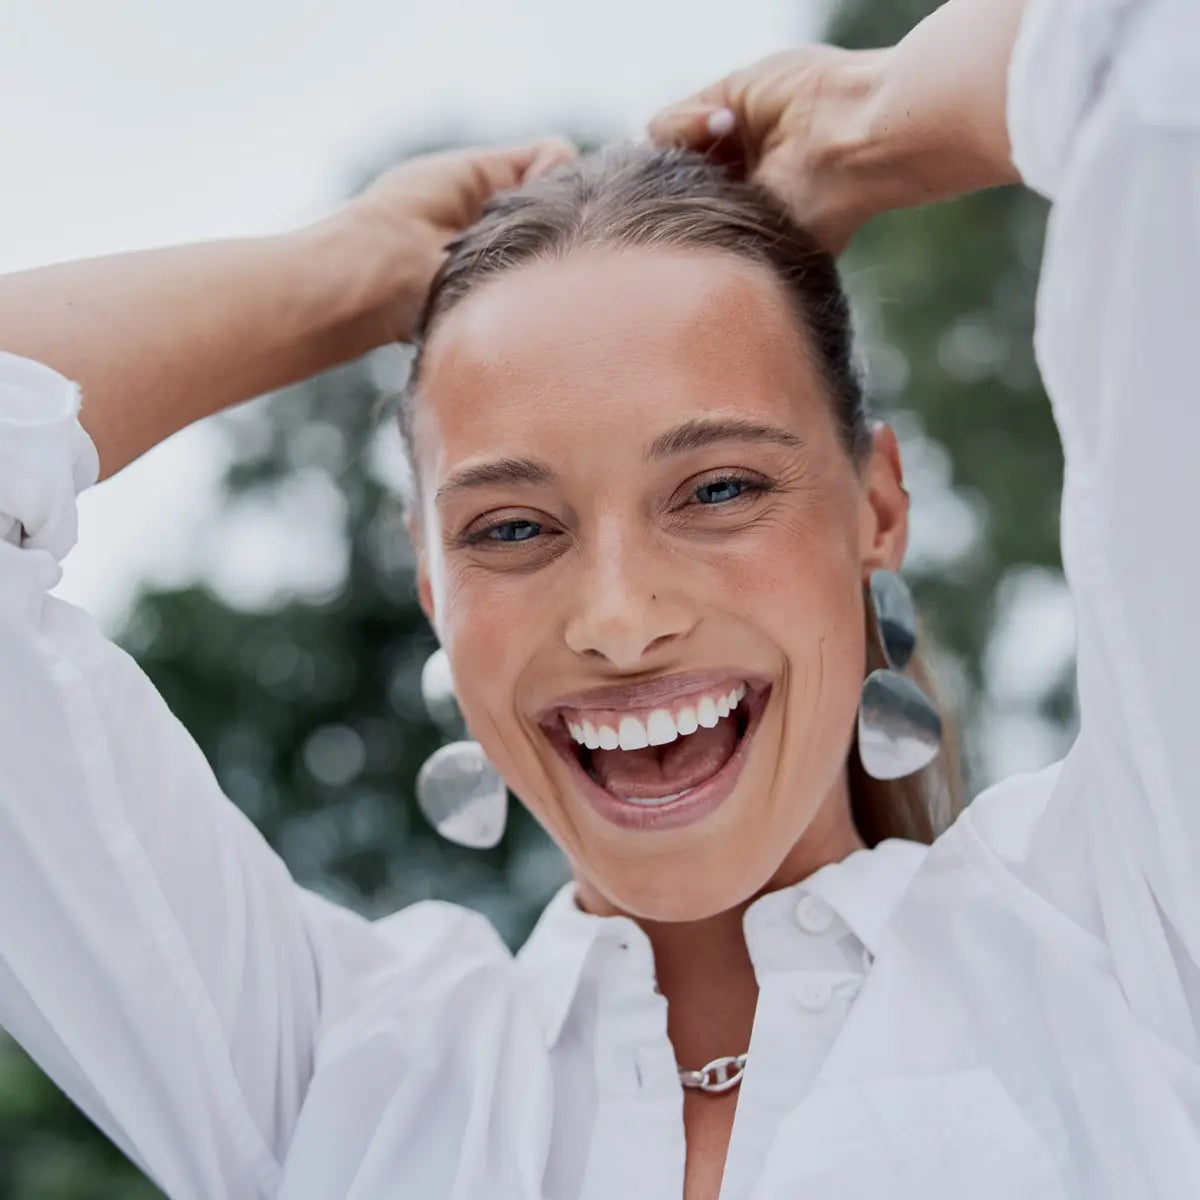 A woman smiling while adjusting her ponytail